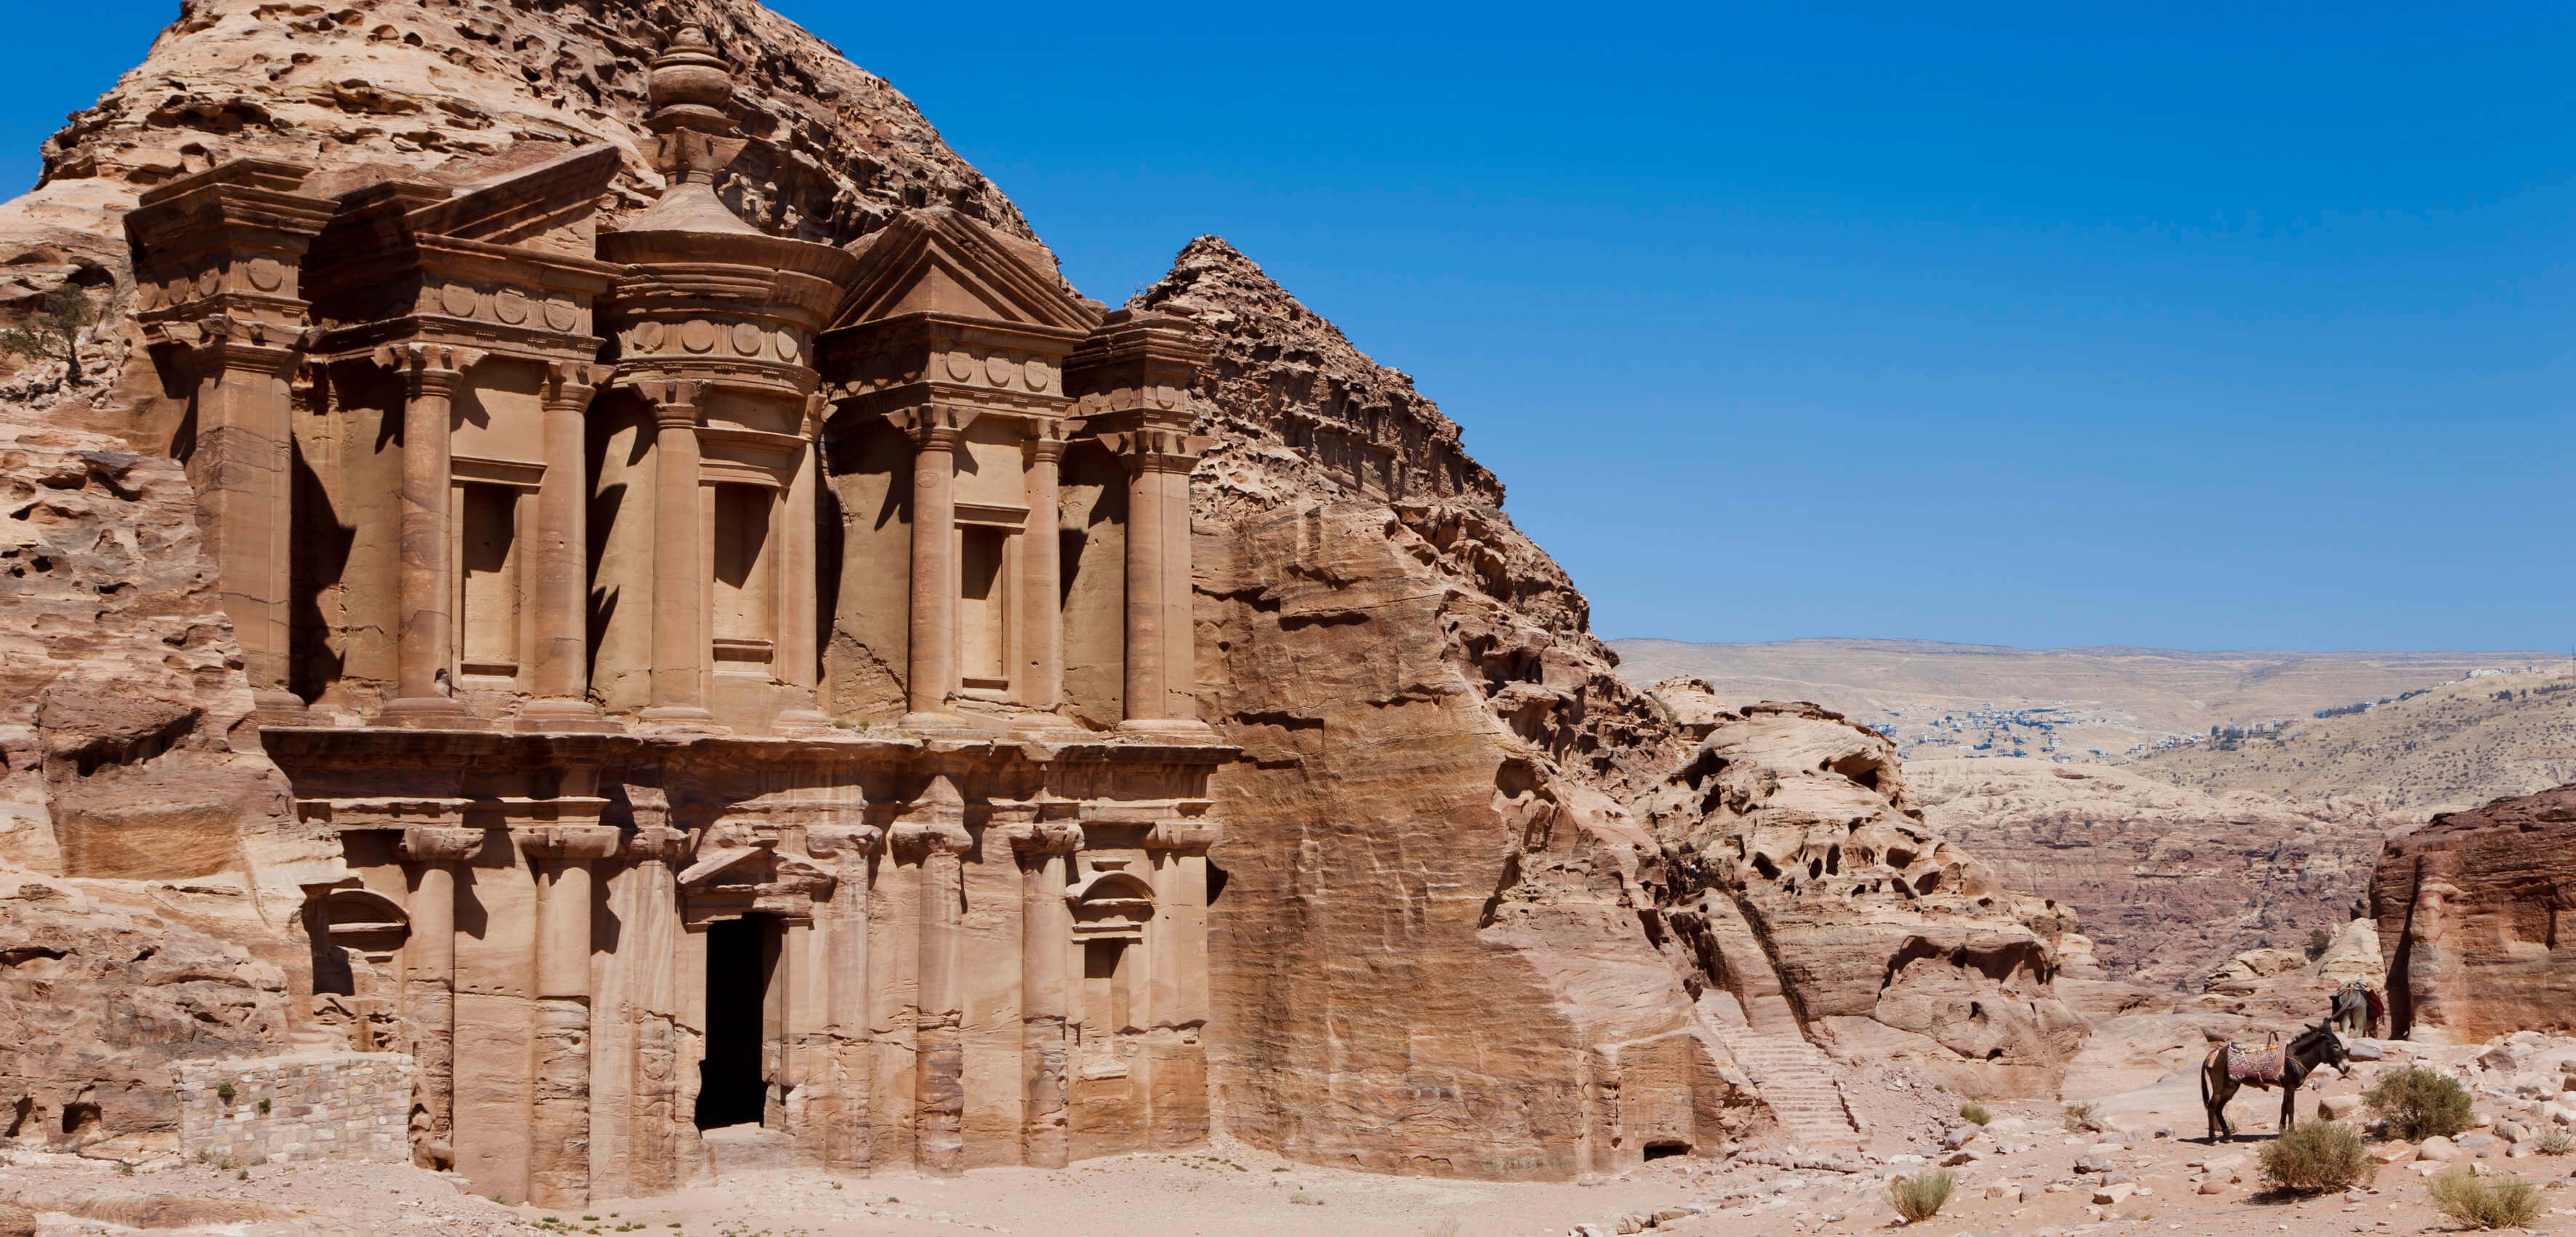 The Monastery, known locally as Ad Deir, located in the UNESCO World Heritage Site of Petra, or Rose-Red city, which was the 6th century capital city of the Nabataeans.